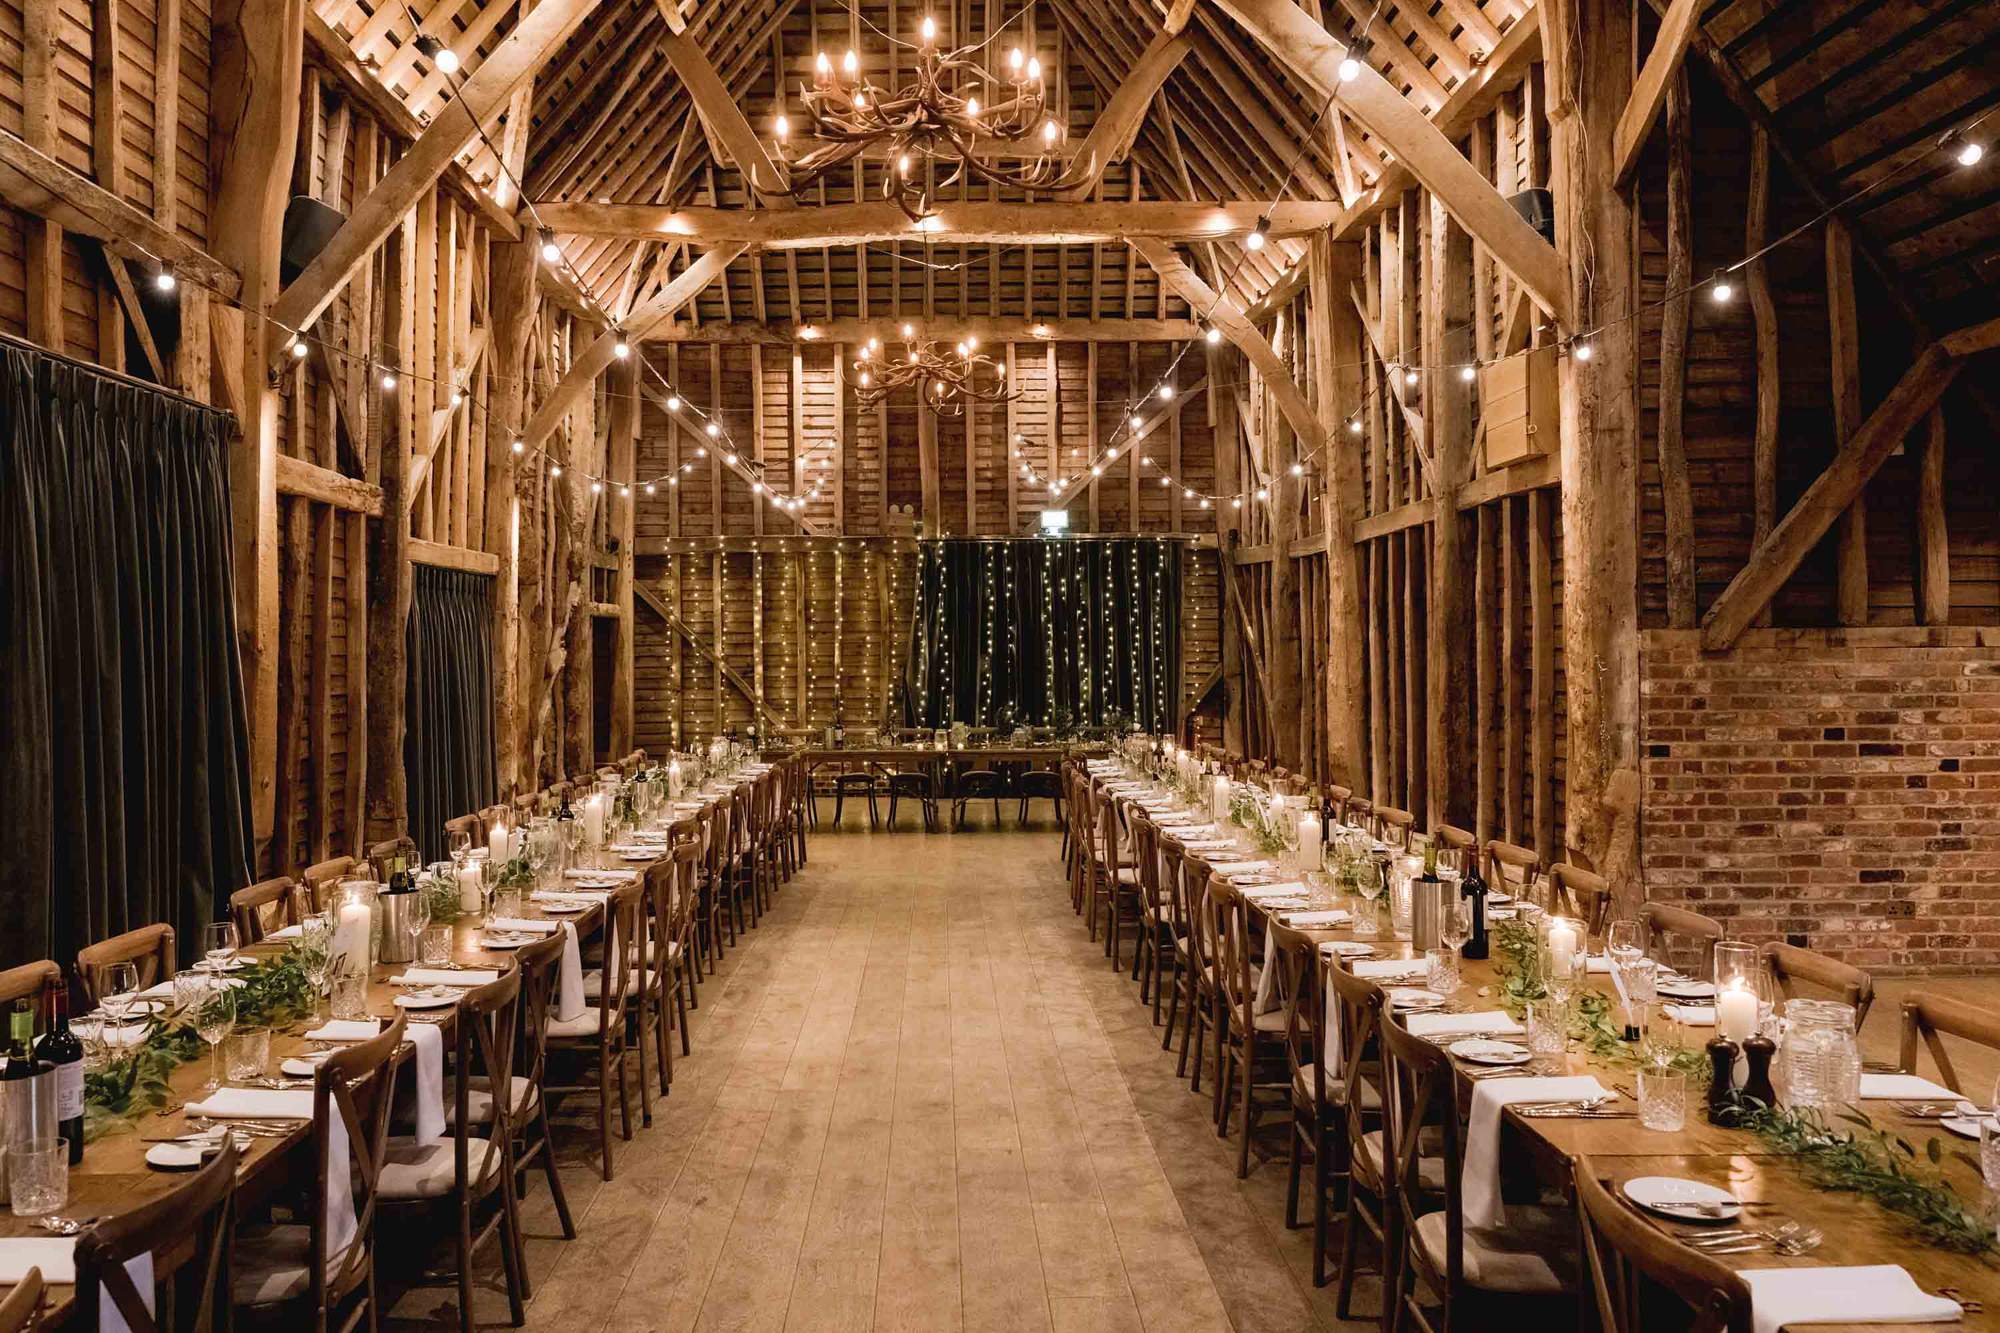 Interior of the barn set for the wedding breakfast at The Farmhouse at Redcoats in Hitchin.